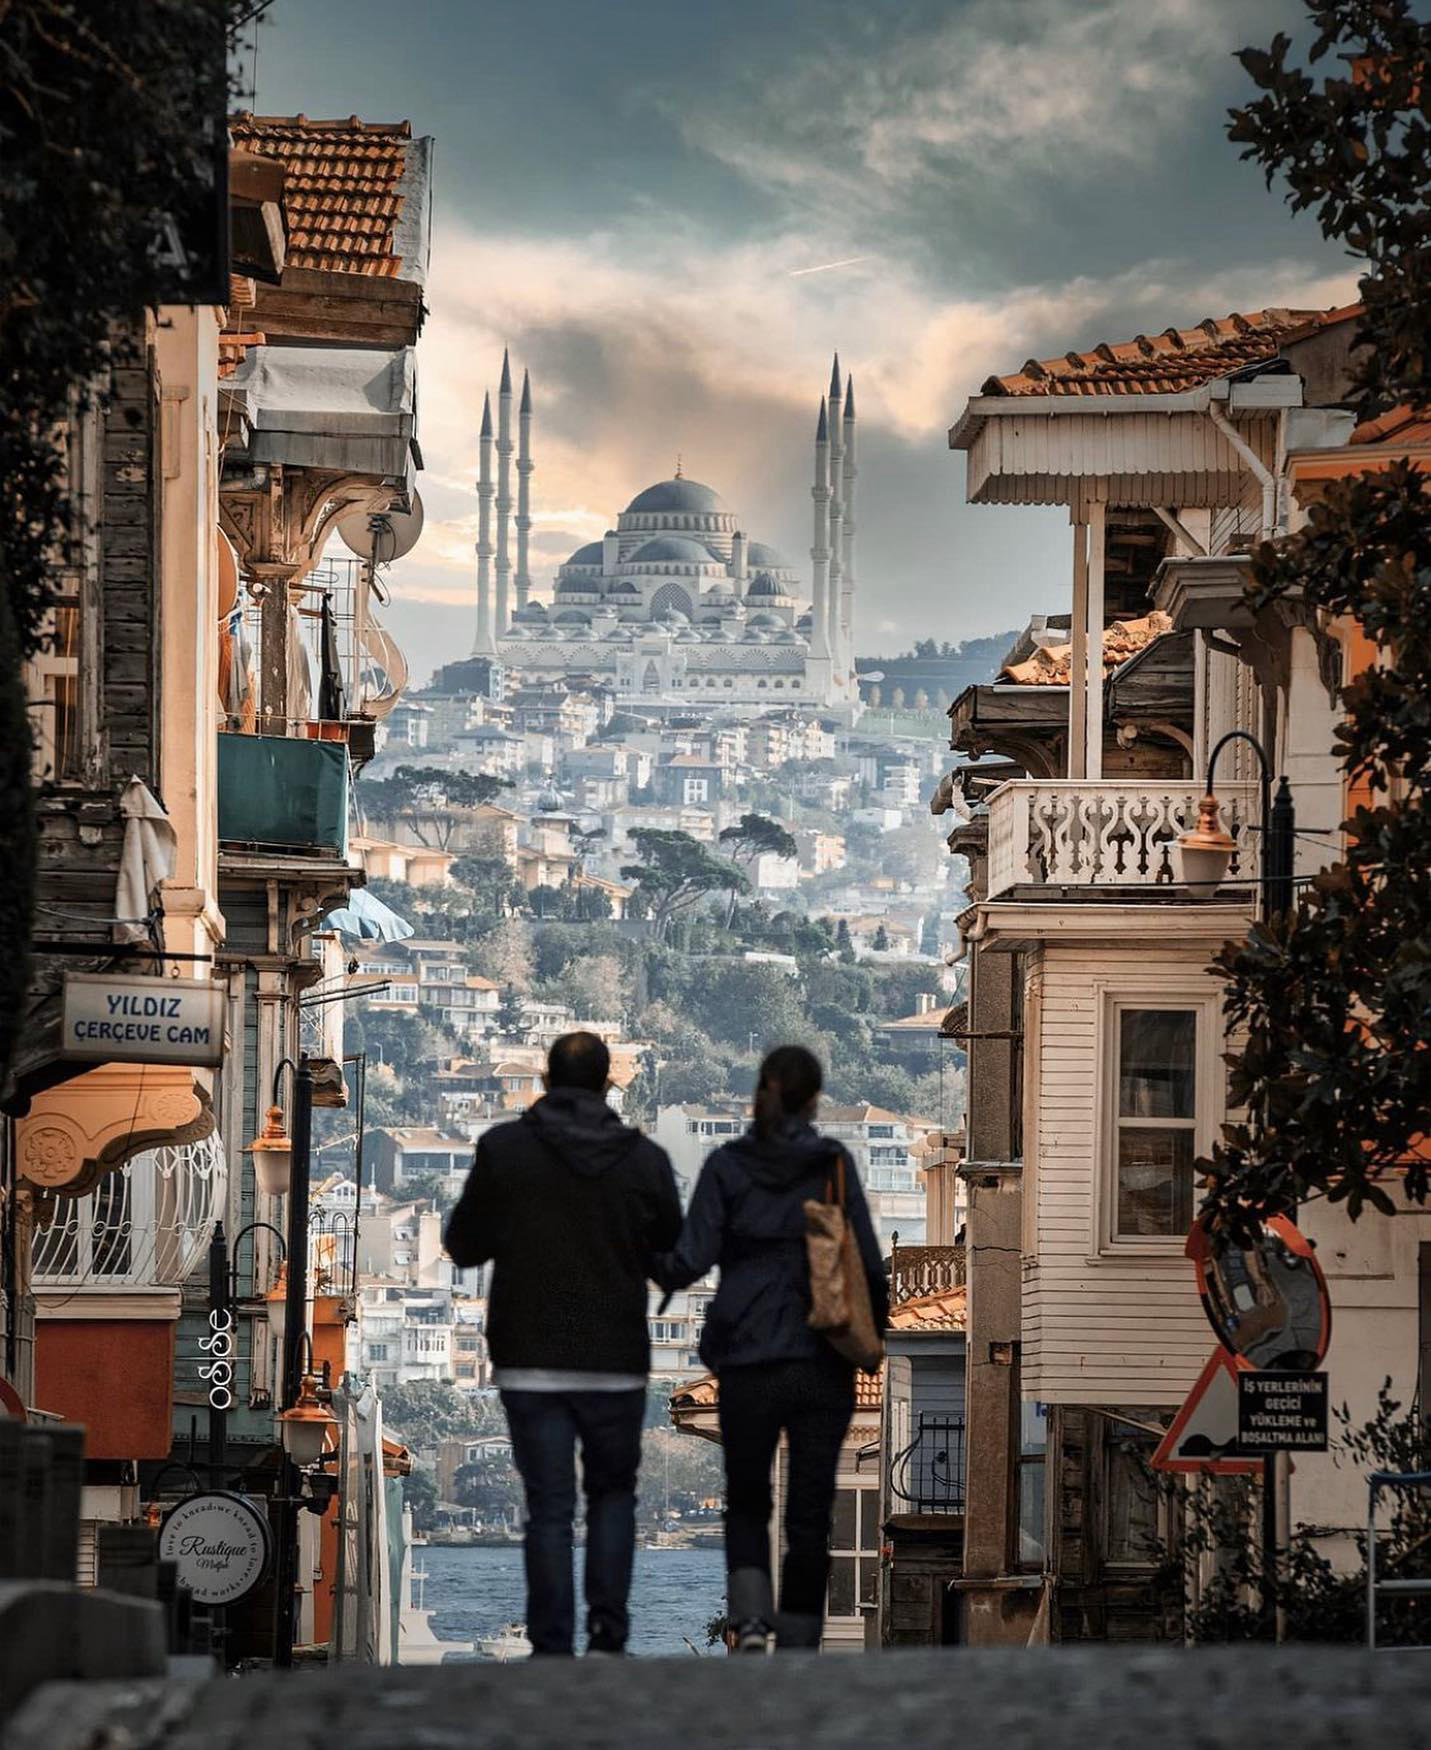 image  1 #istanbul - Great times for enjoyable autumn walks